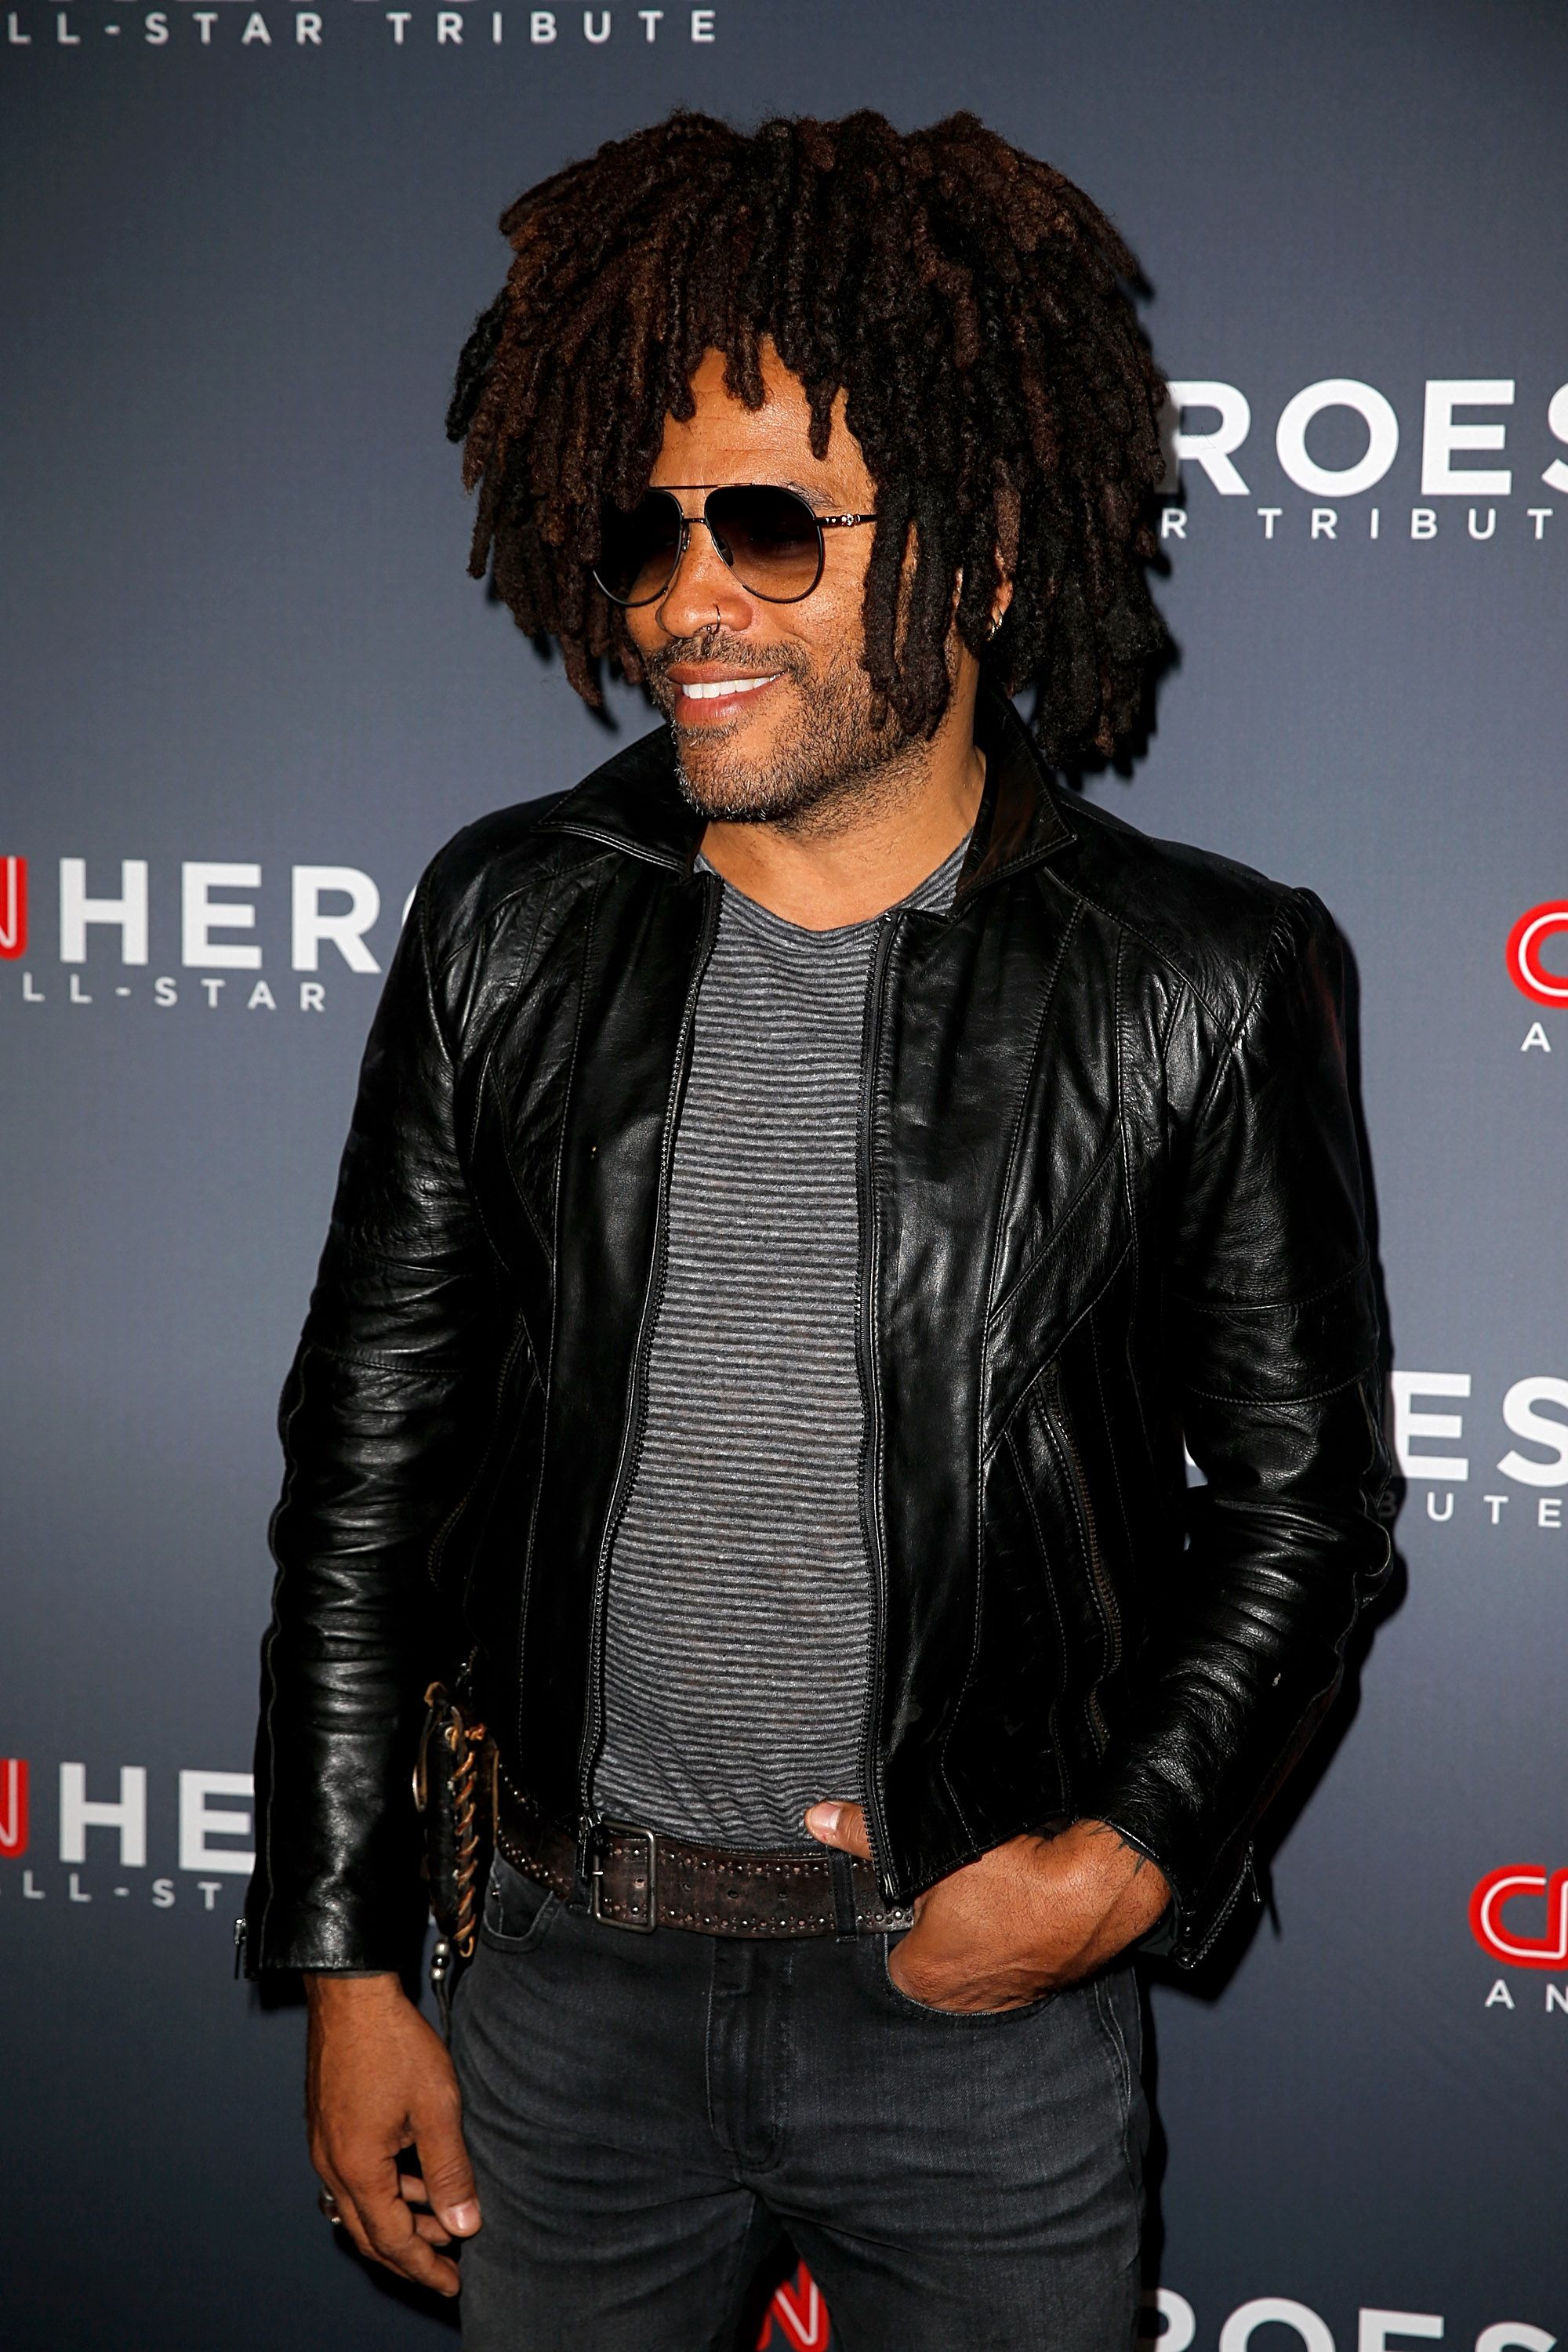 Lenny Kravitz Talks about Healing from His past Experiences in New